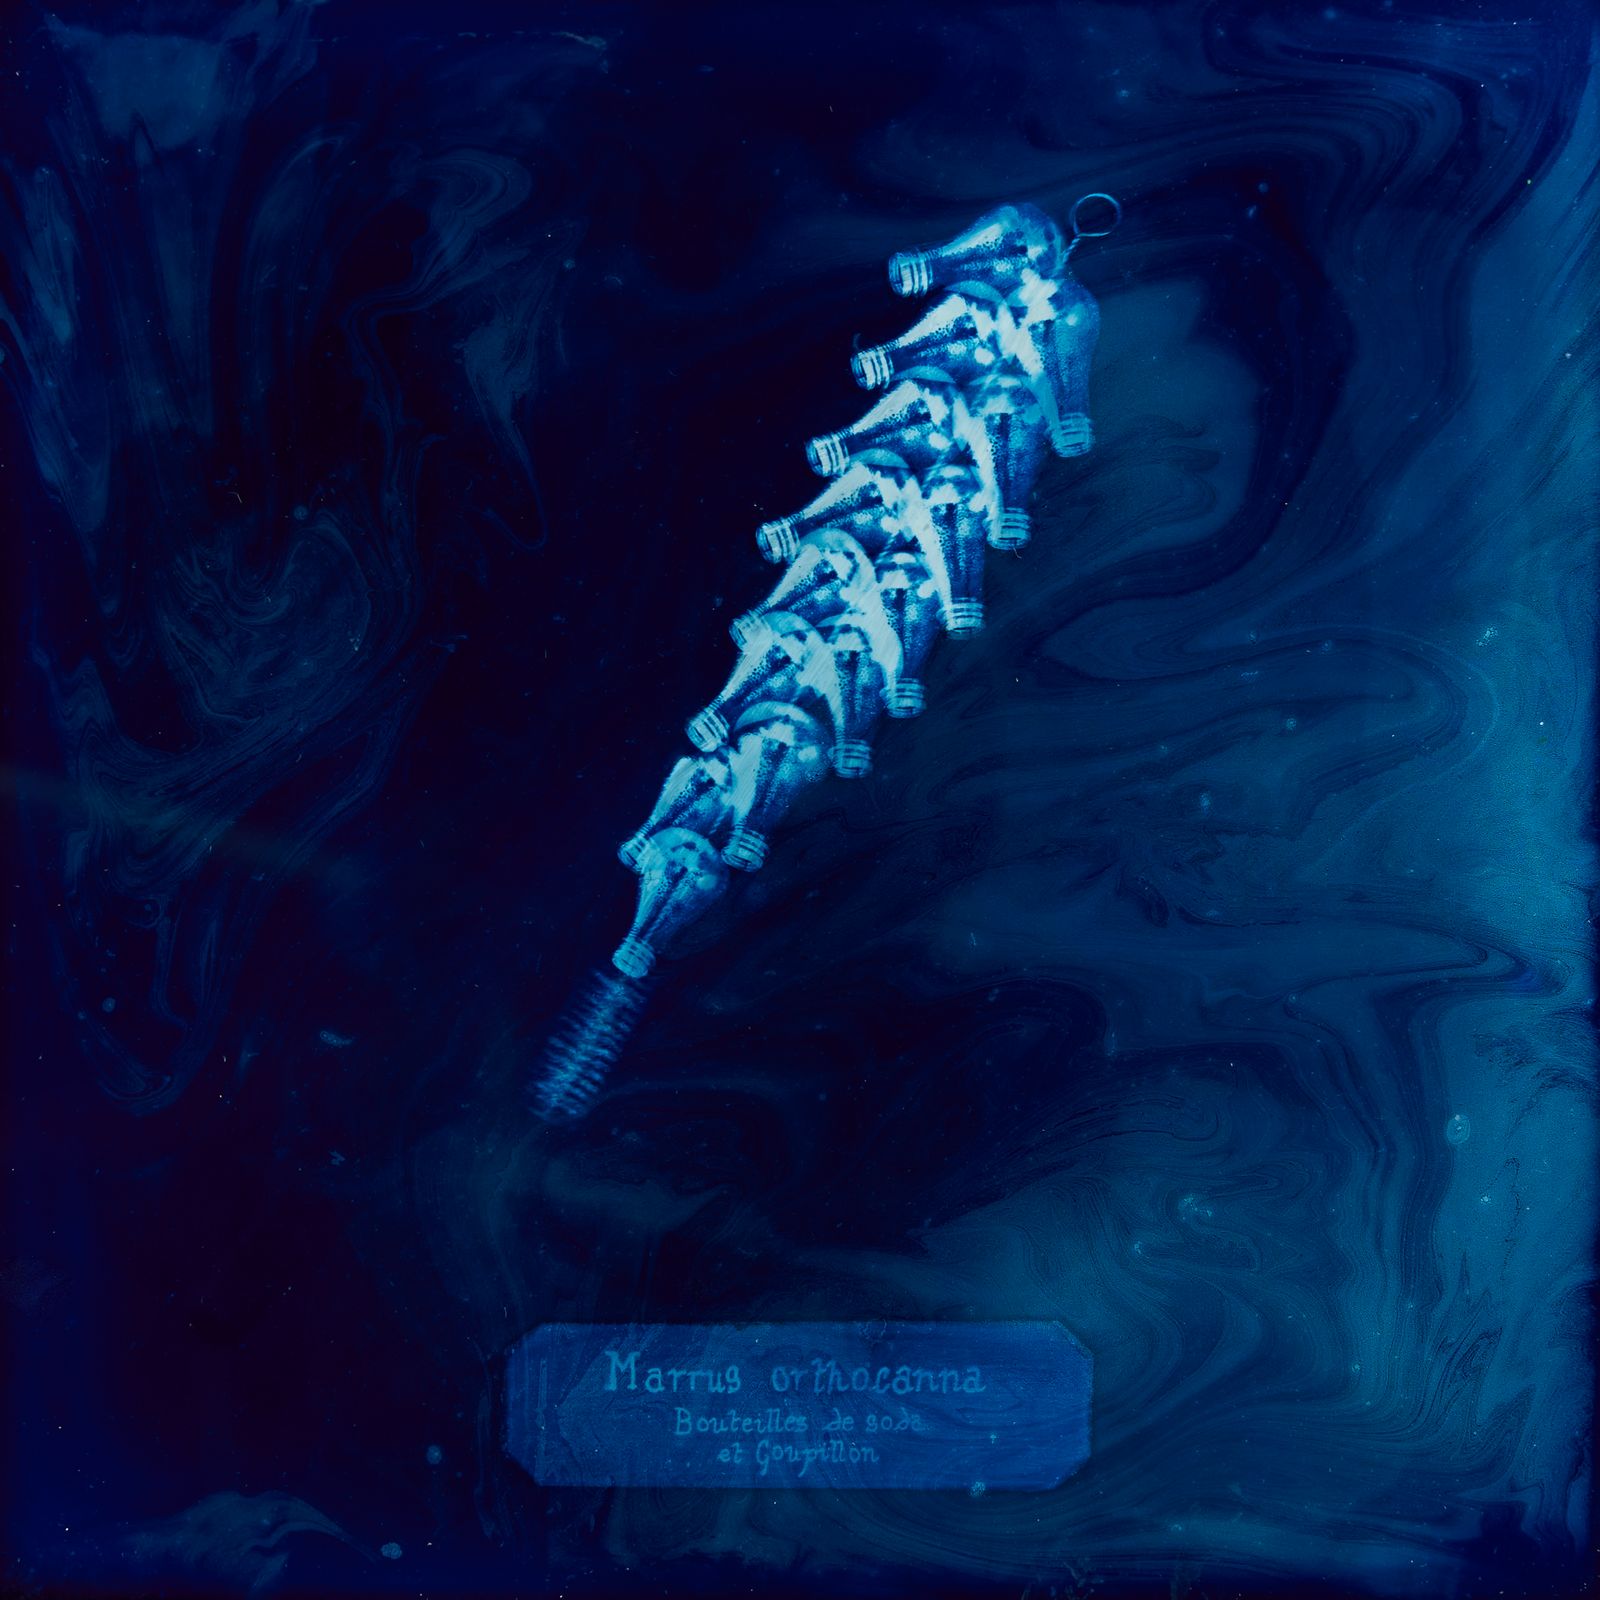 © Manon Lanjouère - Marrus orthocanna, Soda bottles and a bottle brush, Cyanotype on glass and fluorescent vynil emulsion, 20x20 cm